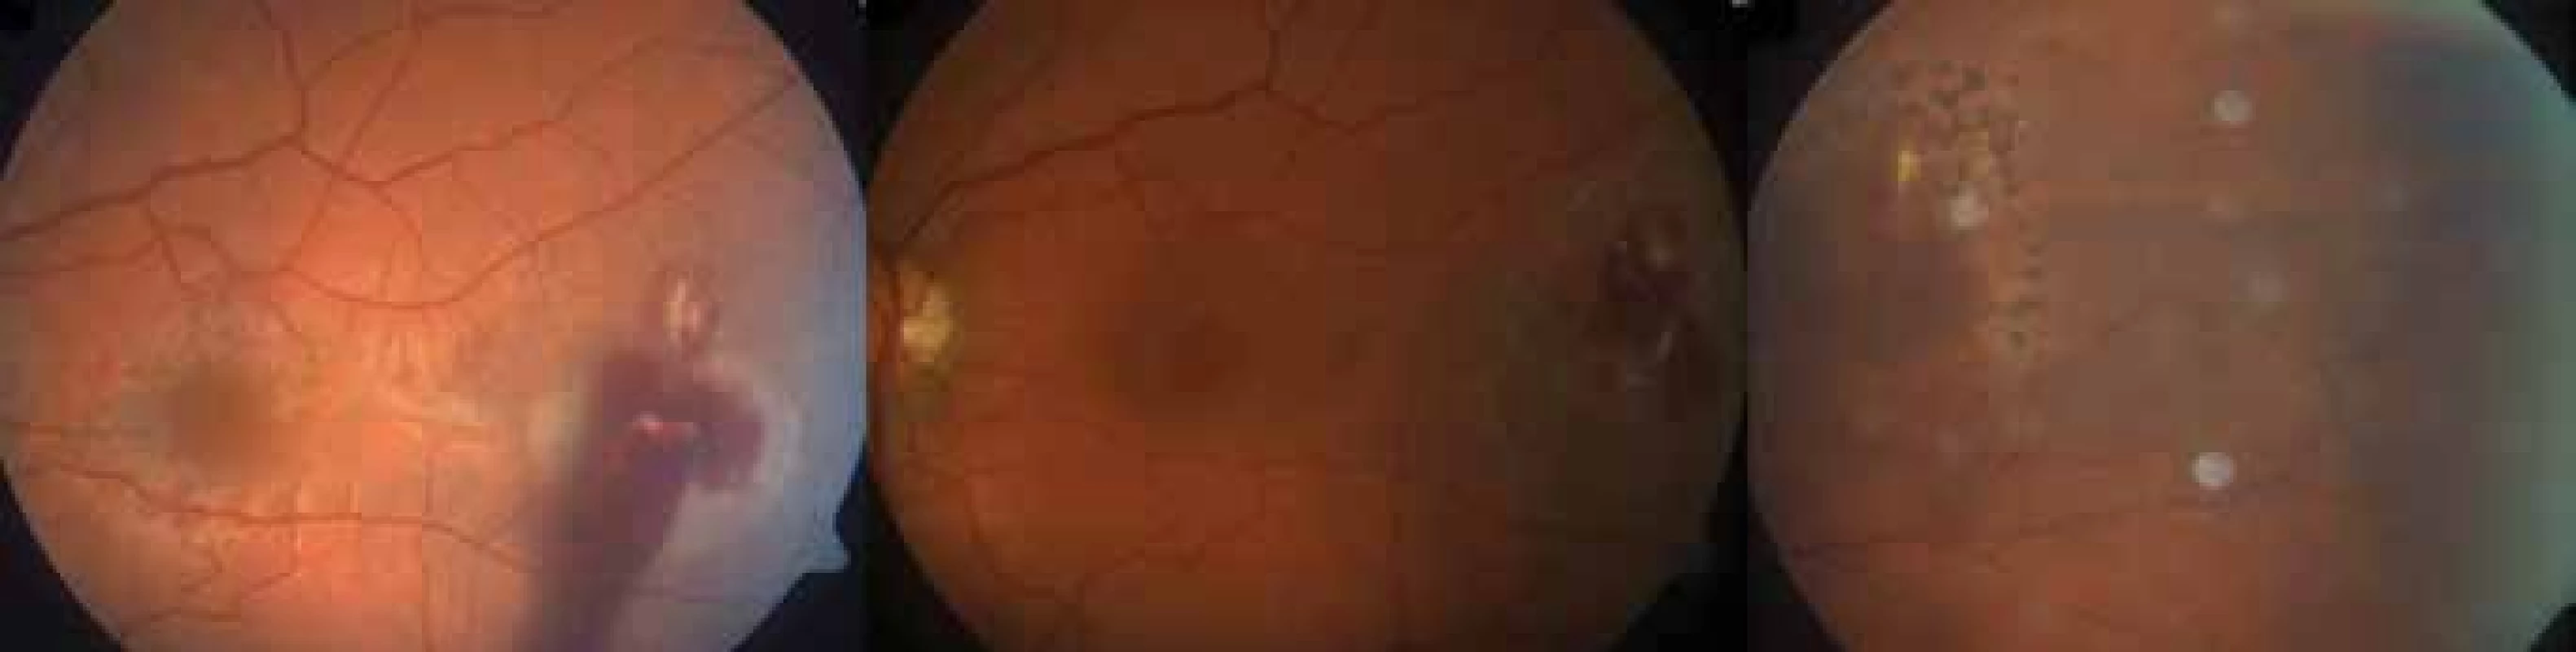 Patient no. 16 – intraocular finding before procedure and development of scar after extraction of IOFB and
endo laser treatment